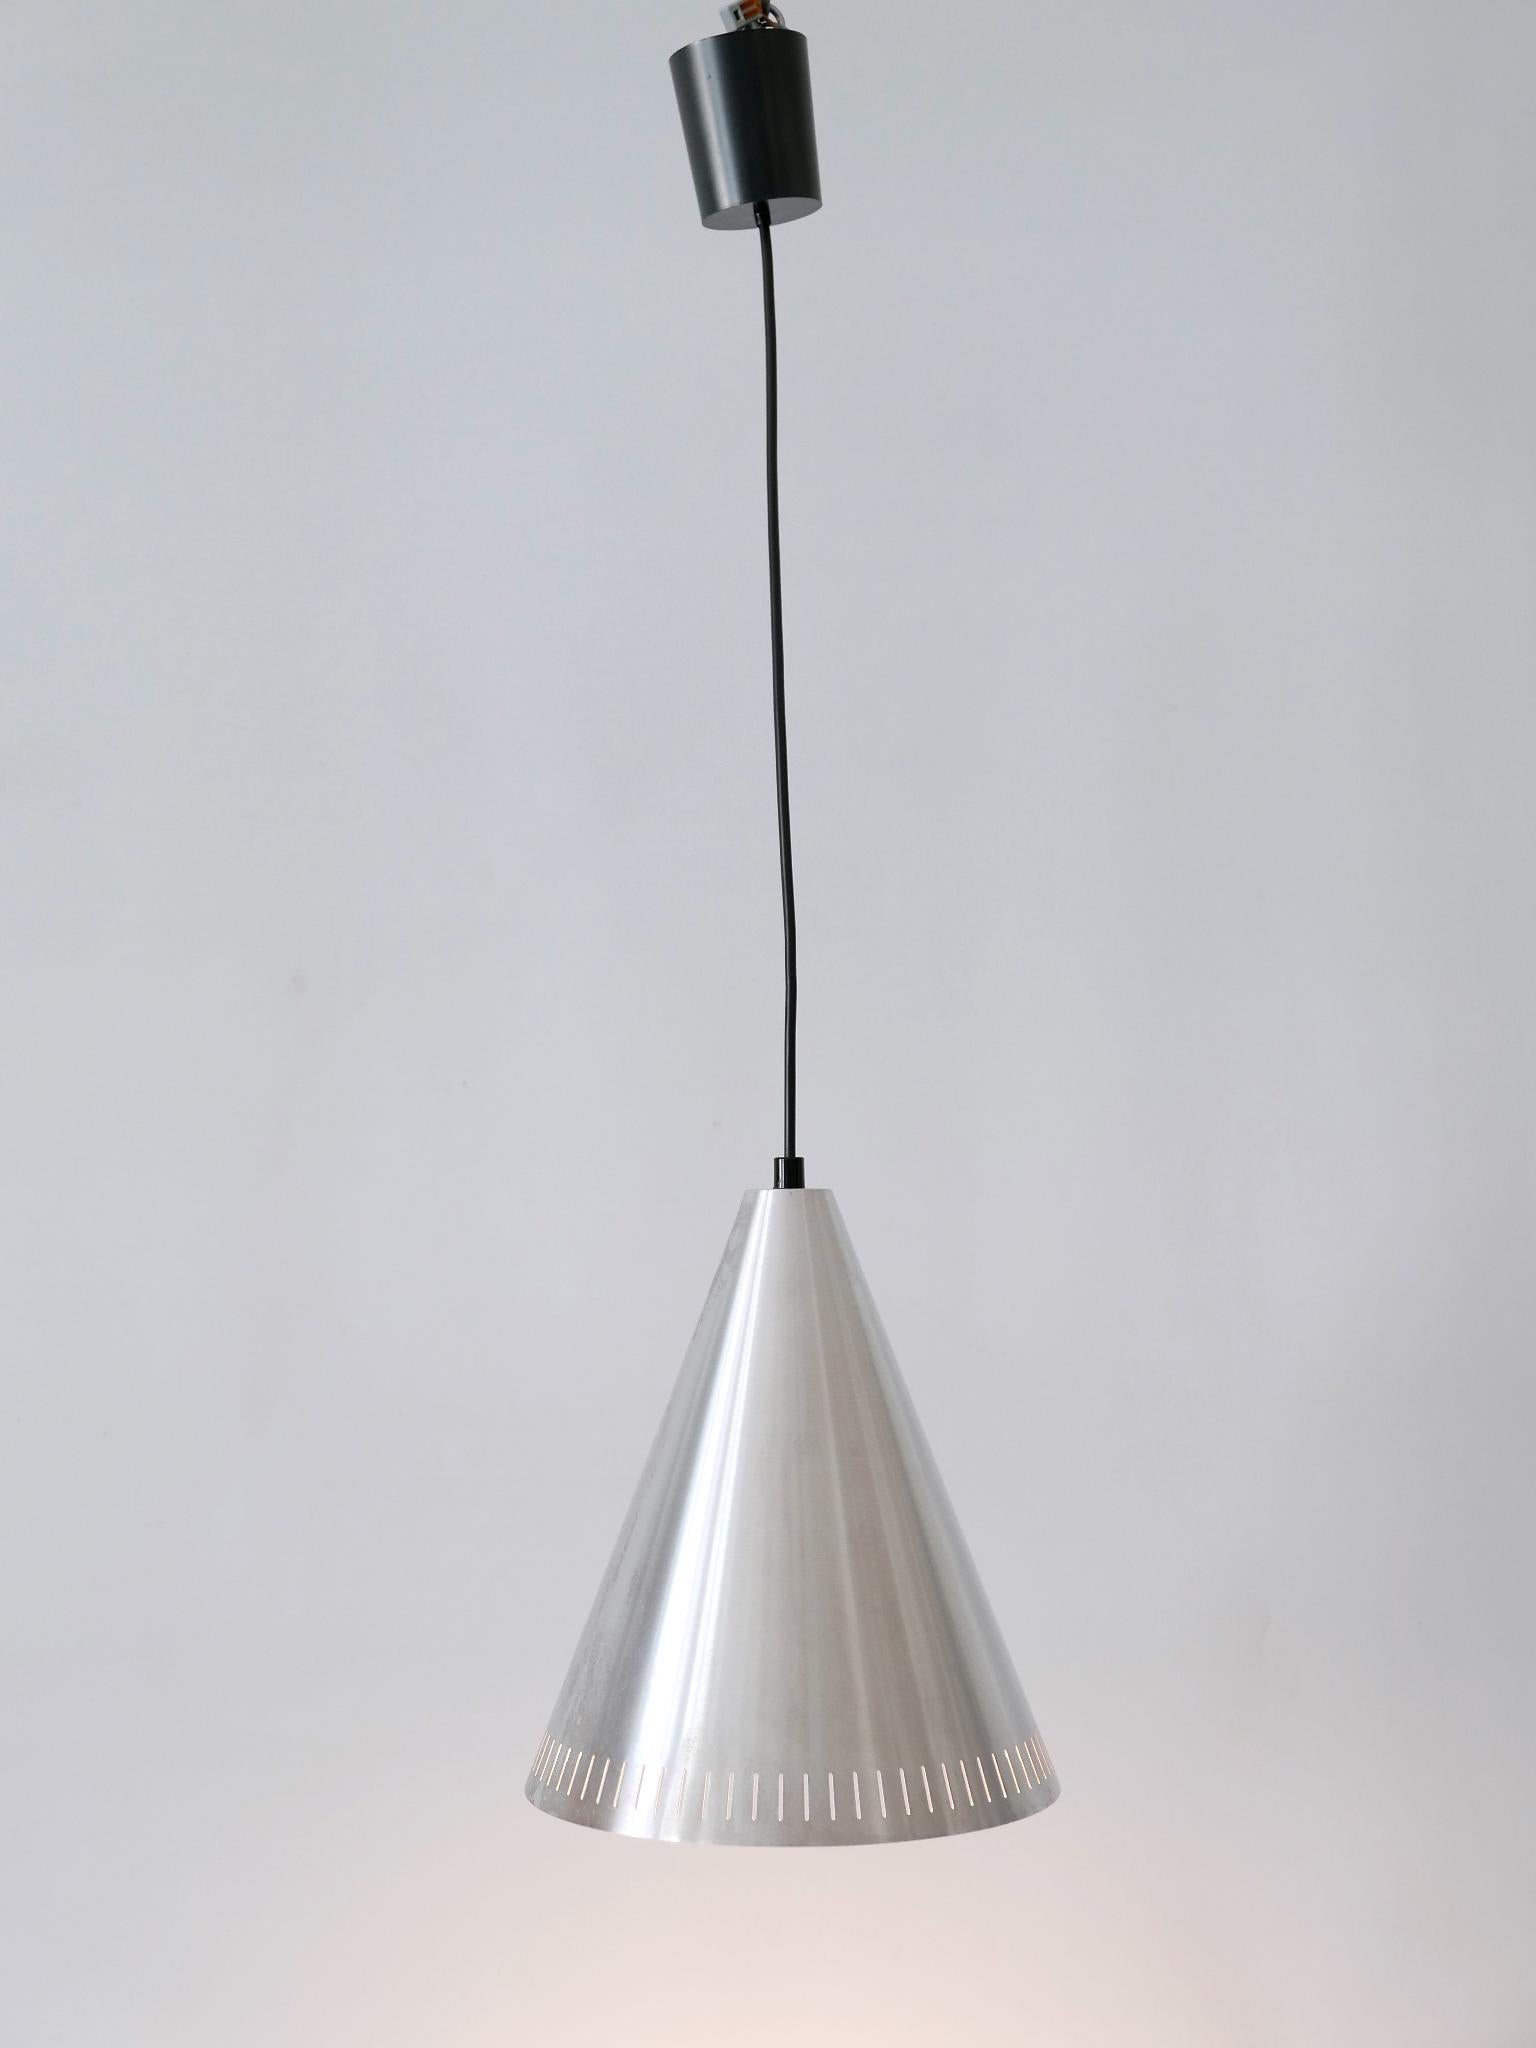 Late 20th Century Set of Four Mid Century Modern Aluminium Pendant Lamps by Goldkant 1970s Germany For Sale